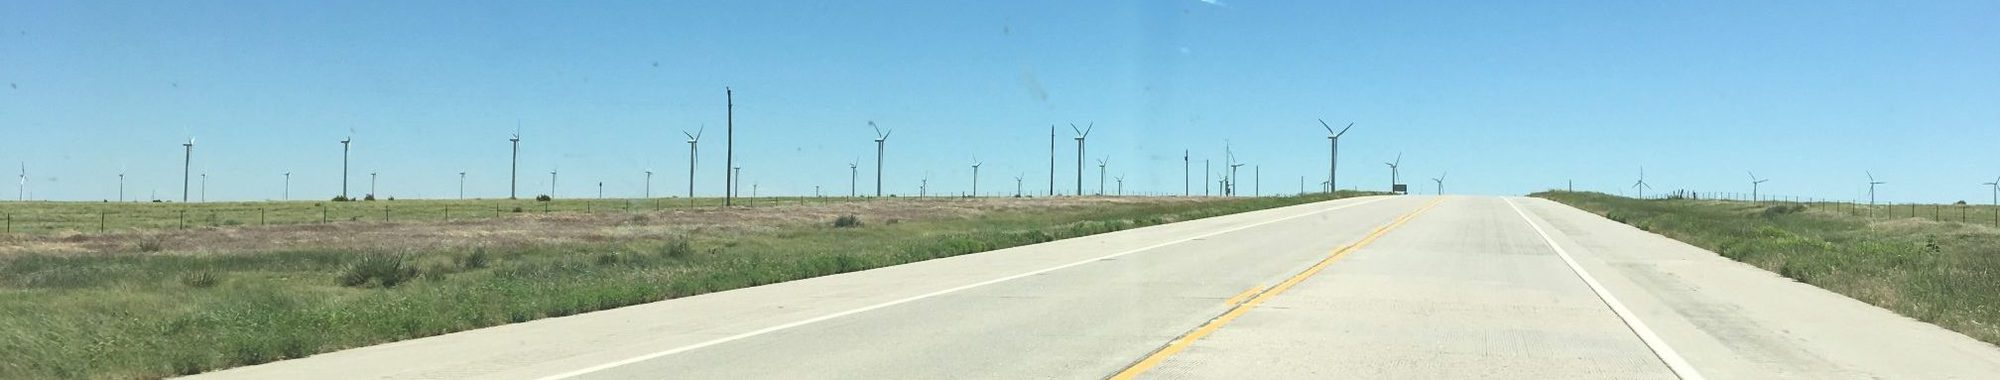 Windmills just off a two lane highway